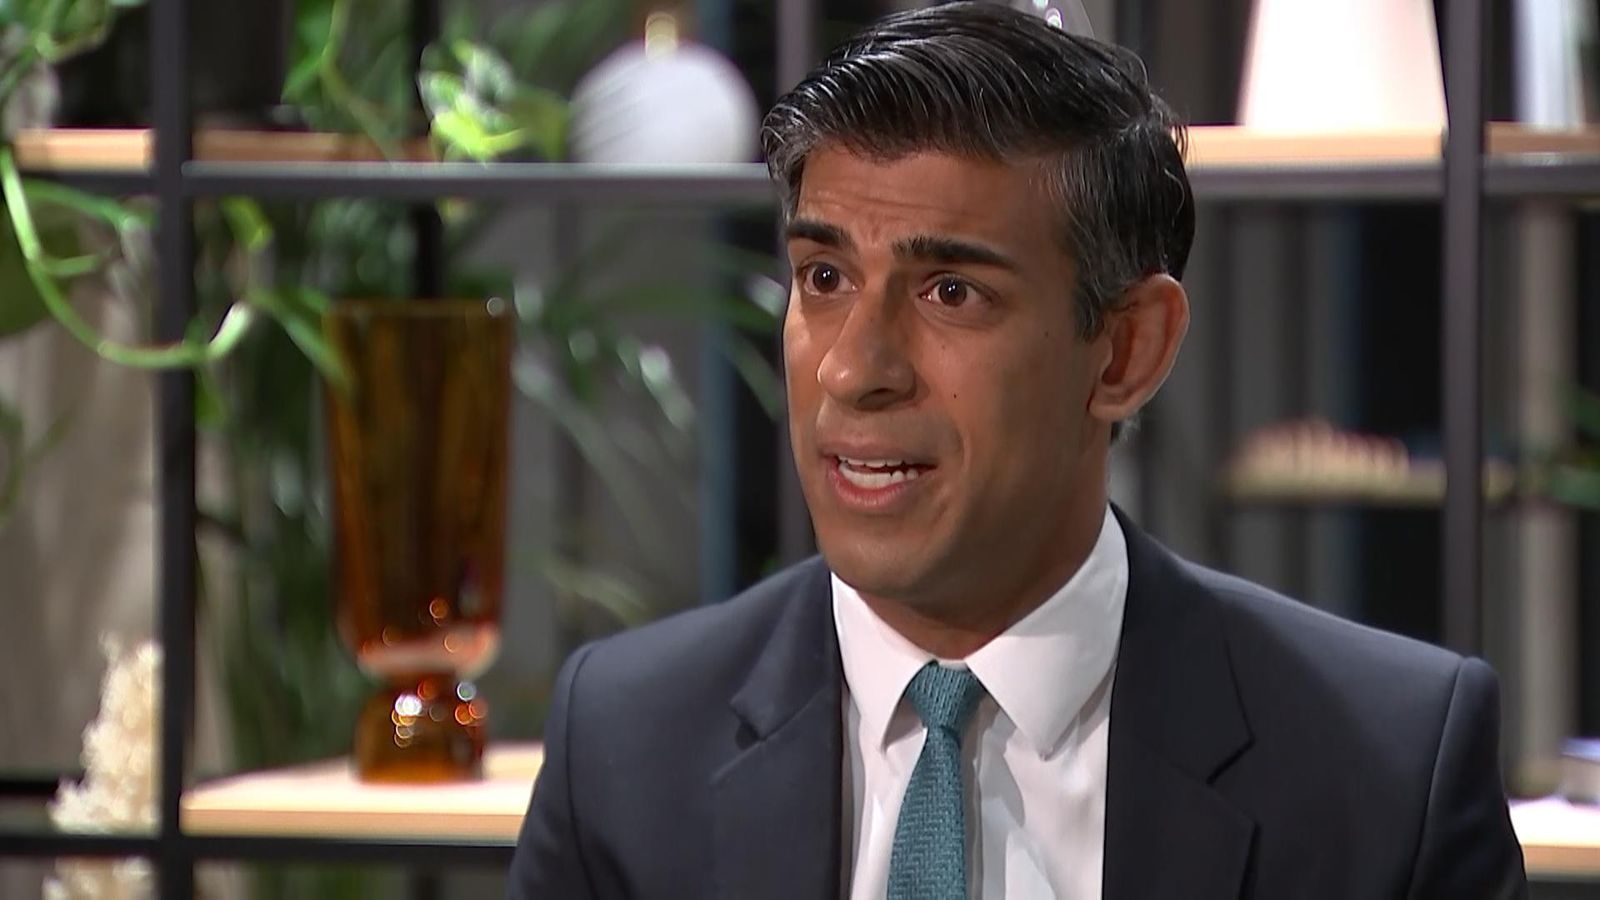 'No option is off the table' when considering windfall tax on oil and gas firms, Rishi Sunak says